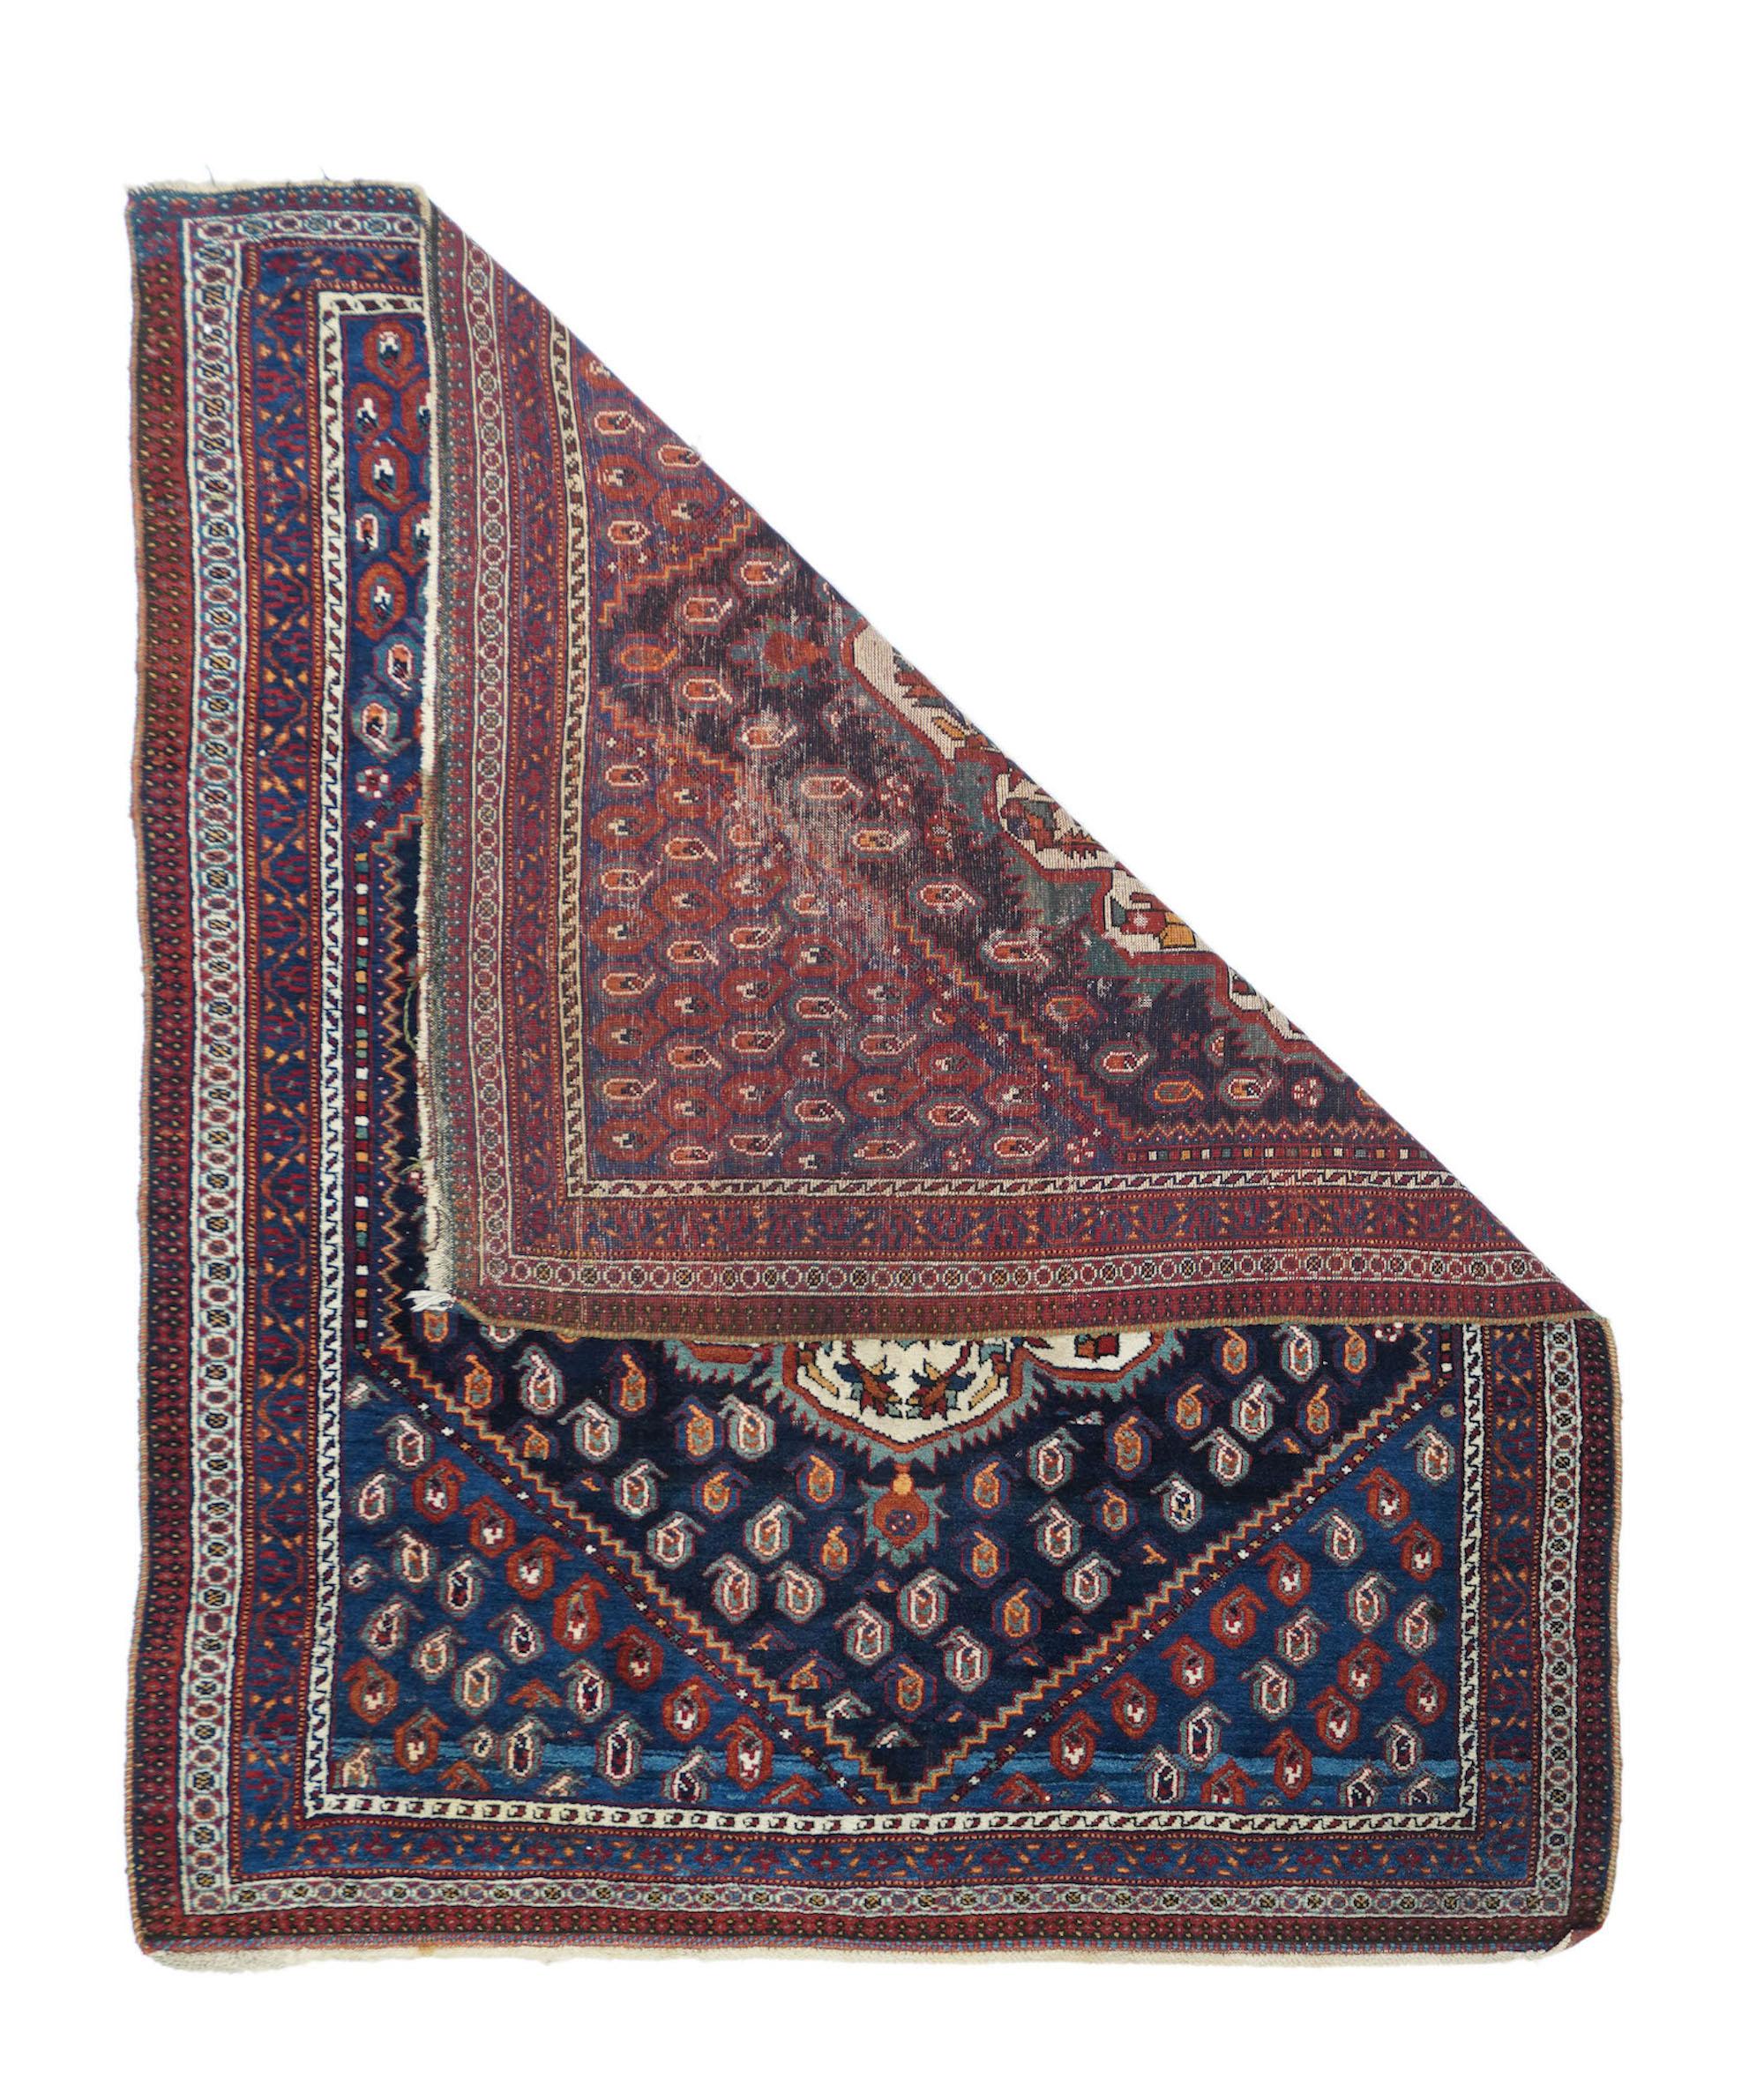 Antique Afshar rug. Measures: 3.11'' x 4.10''. Rows of small reversing botehs fill the navy subfield and the surrounding medium blue field, while in the centre is a large 12 lobe ivory medallion with ragged barbed edge and a red octogramme